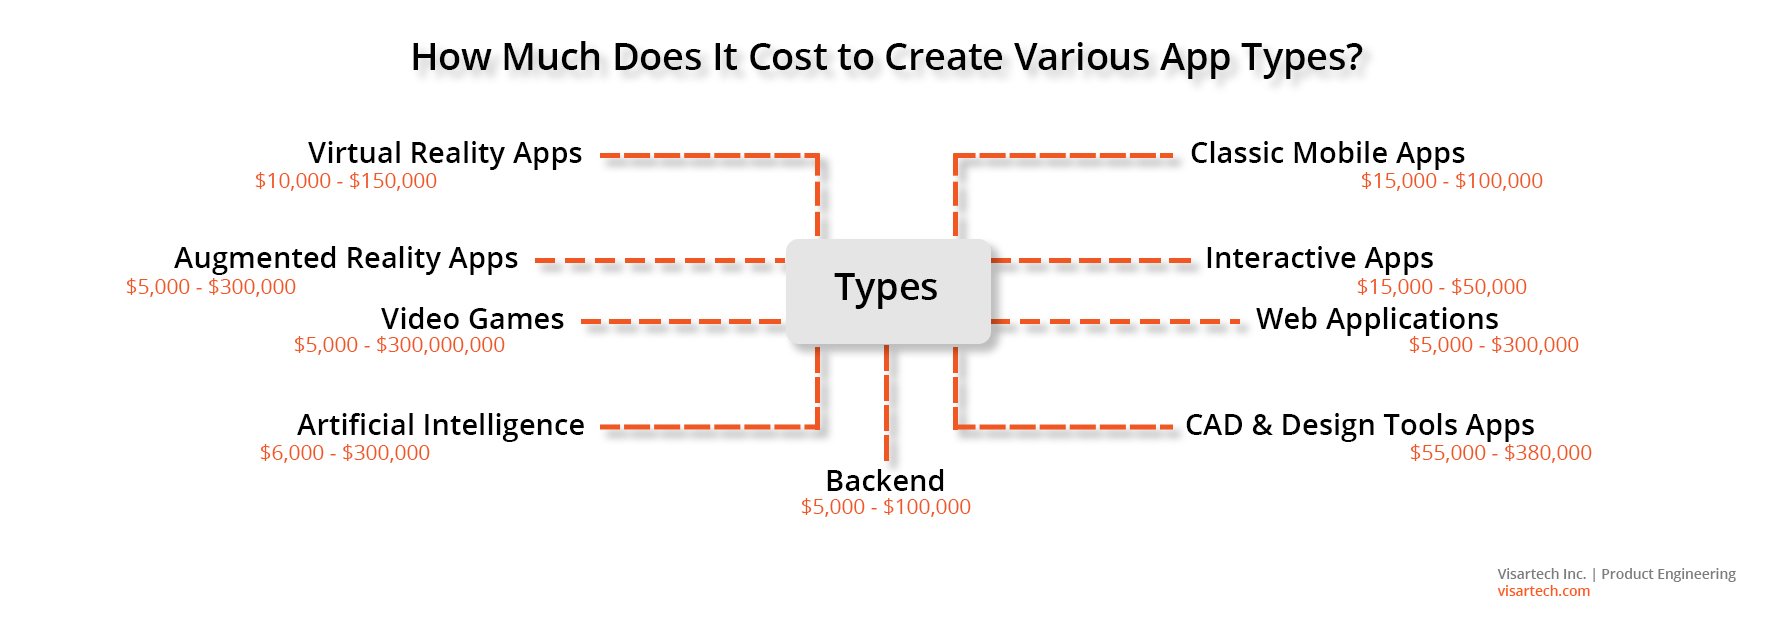 How Much Does It Cost to Create Various App Types - Visartech Blog